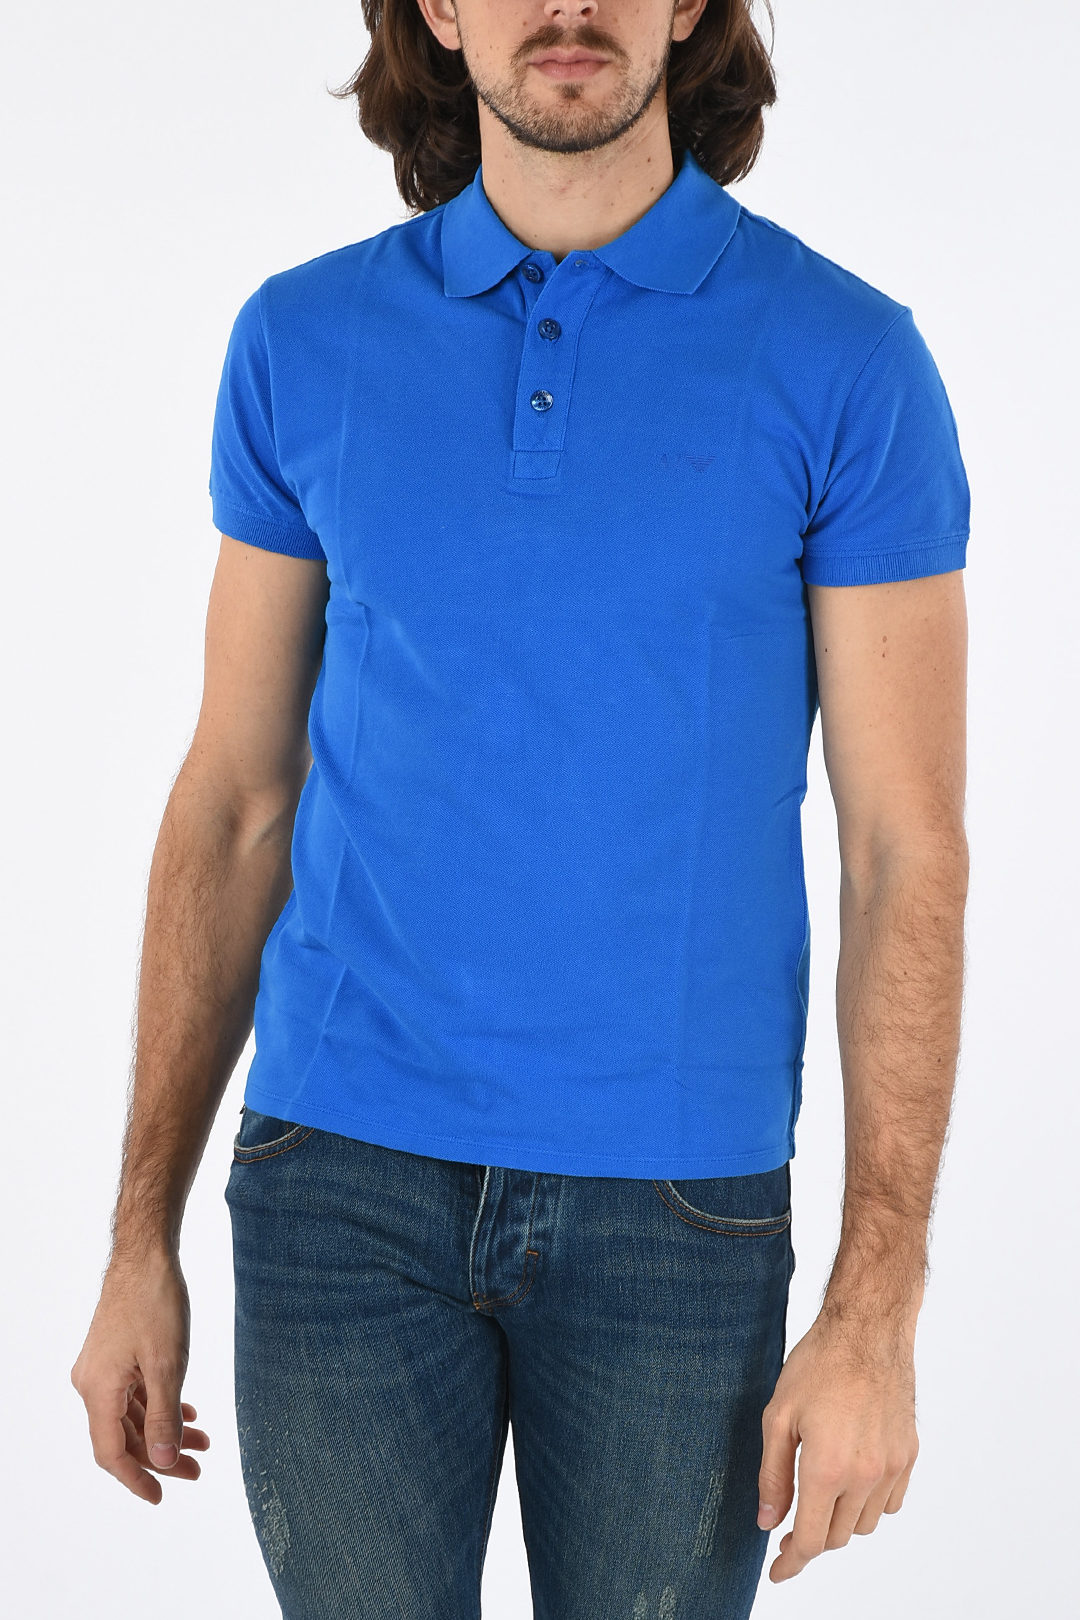 ARMANI JEANS Muscle Fit Polo men - Glamood